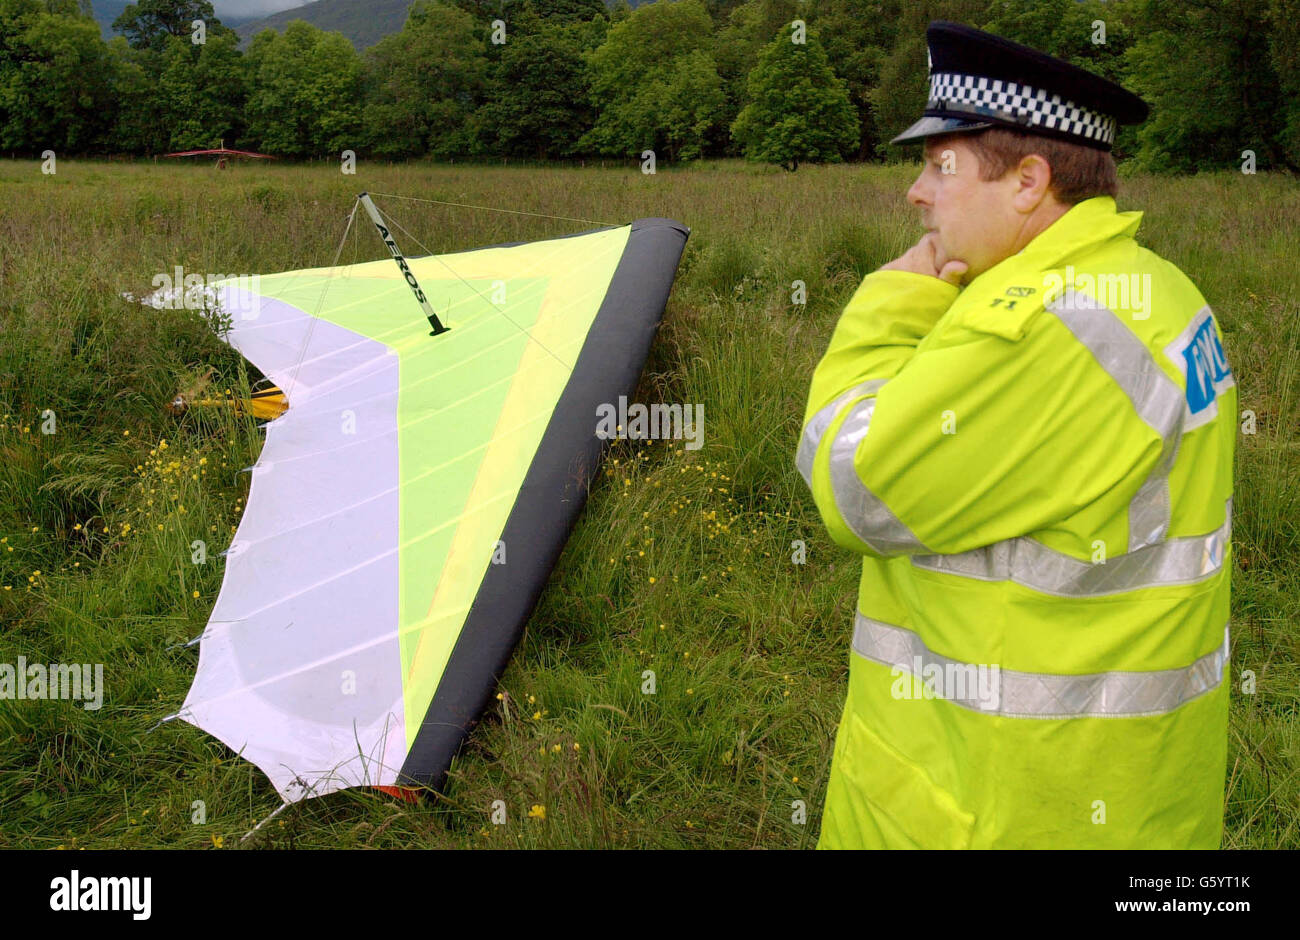 Constable Ian Carnegie from Crianlarich Police inspects the damaged hand-glider near Inverhaggernie Farm, one mile north of Crianlarich in Perthshire, Scotland. where one man died as the hanglider collided with an 11,000 volt electric power cable. * Police believe the victim to have been 42 and from Cambridgeshire. Stock Photo